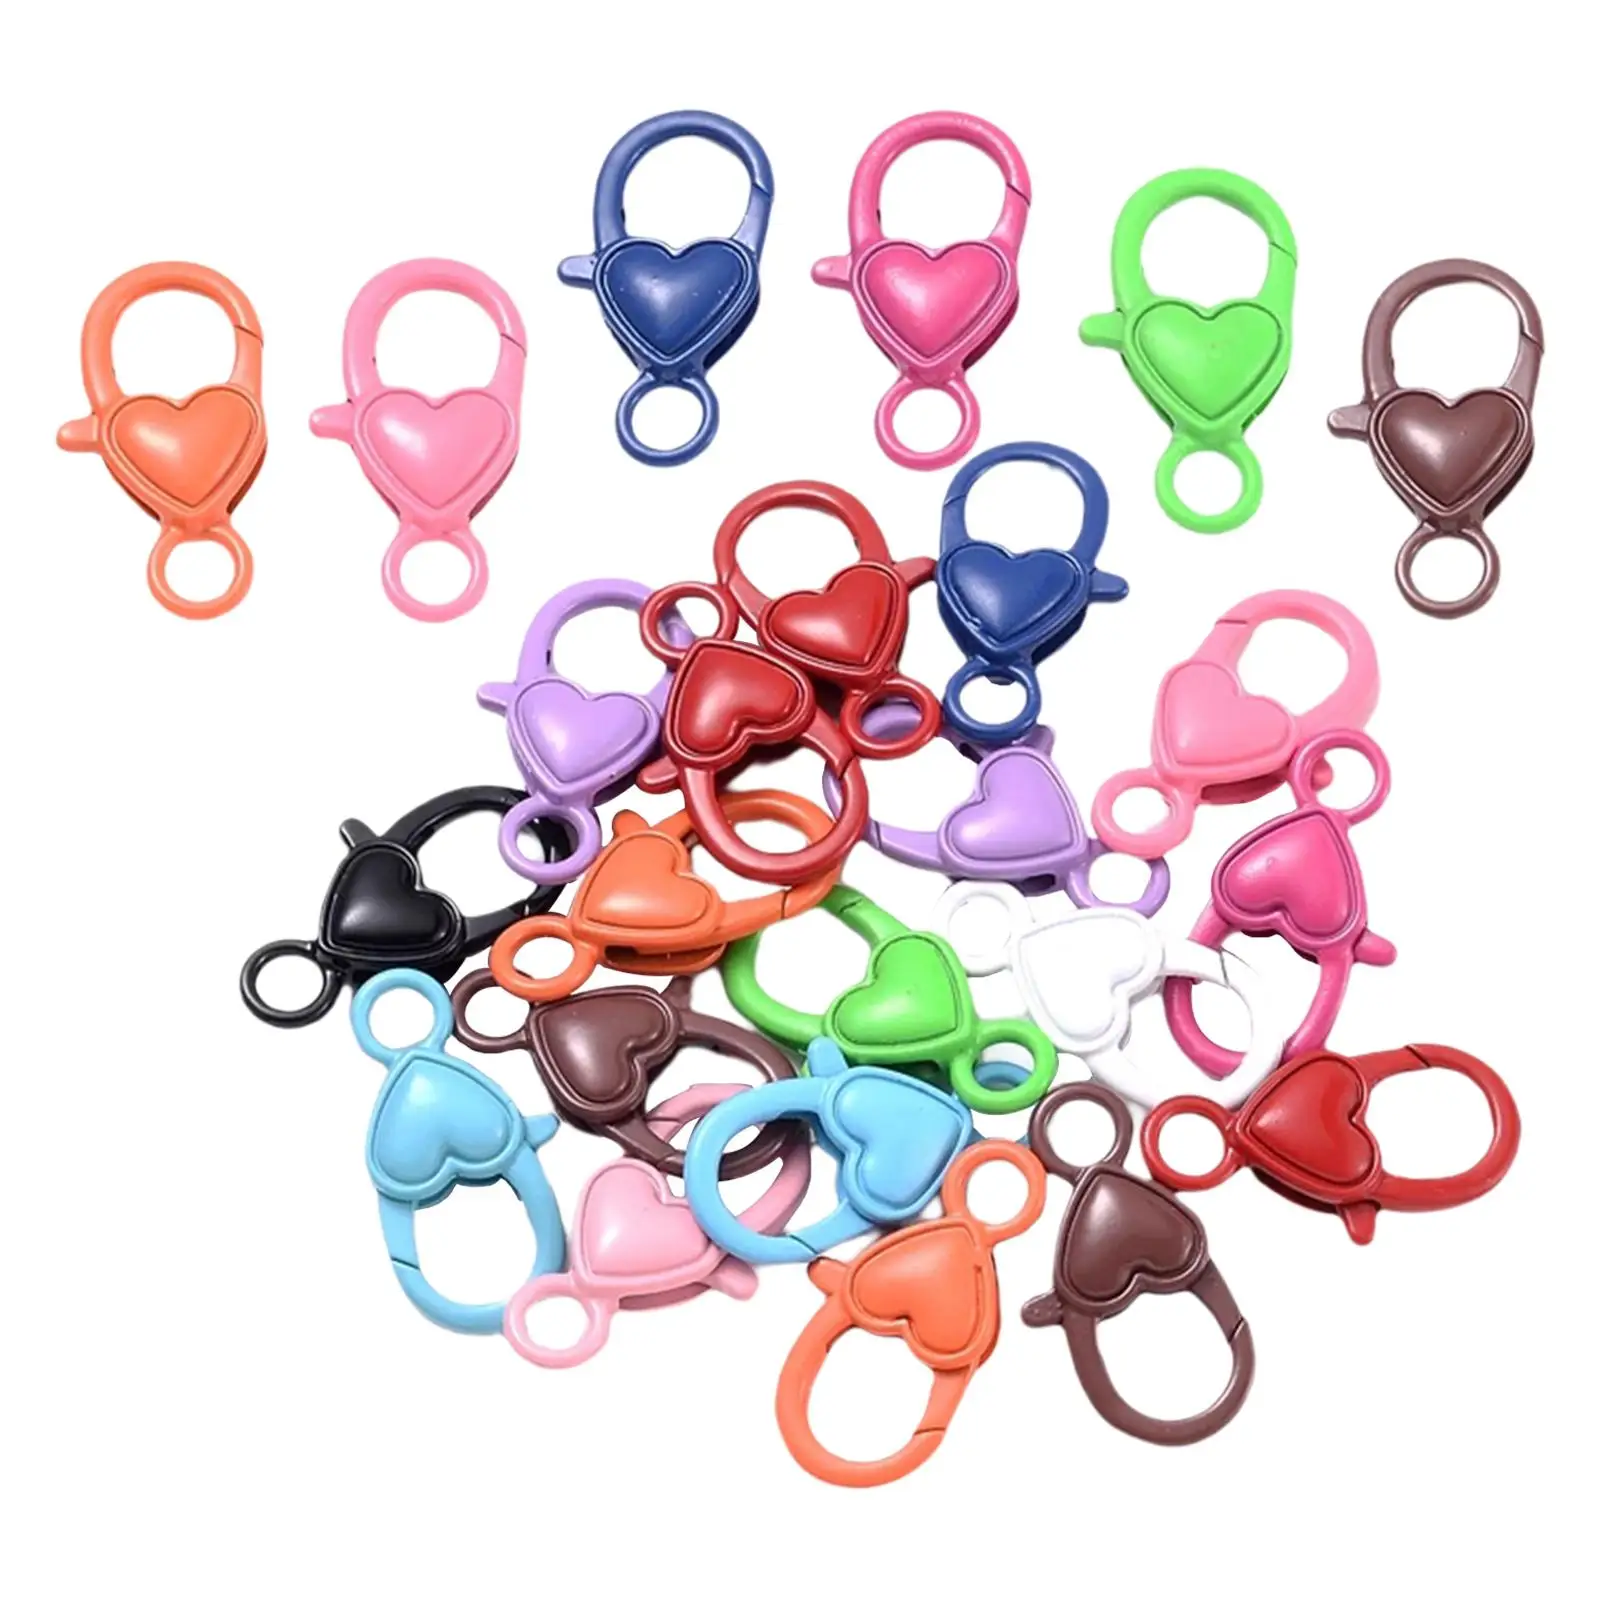 100Pcs  Lobster Claw Clasp  Buckle Lobster Clasp Hard Accessories for Keychain Bag Charms Jewelry Making Findings